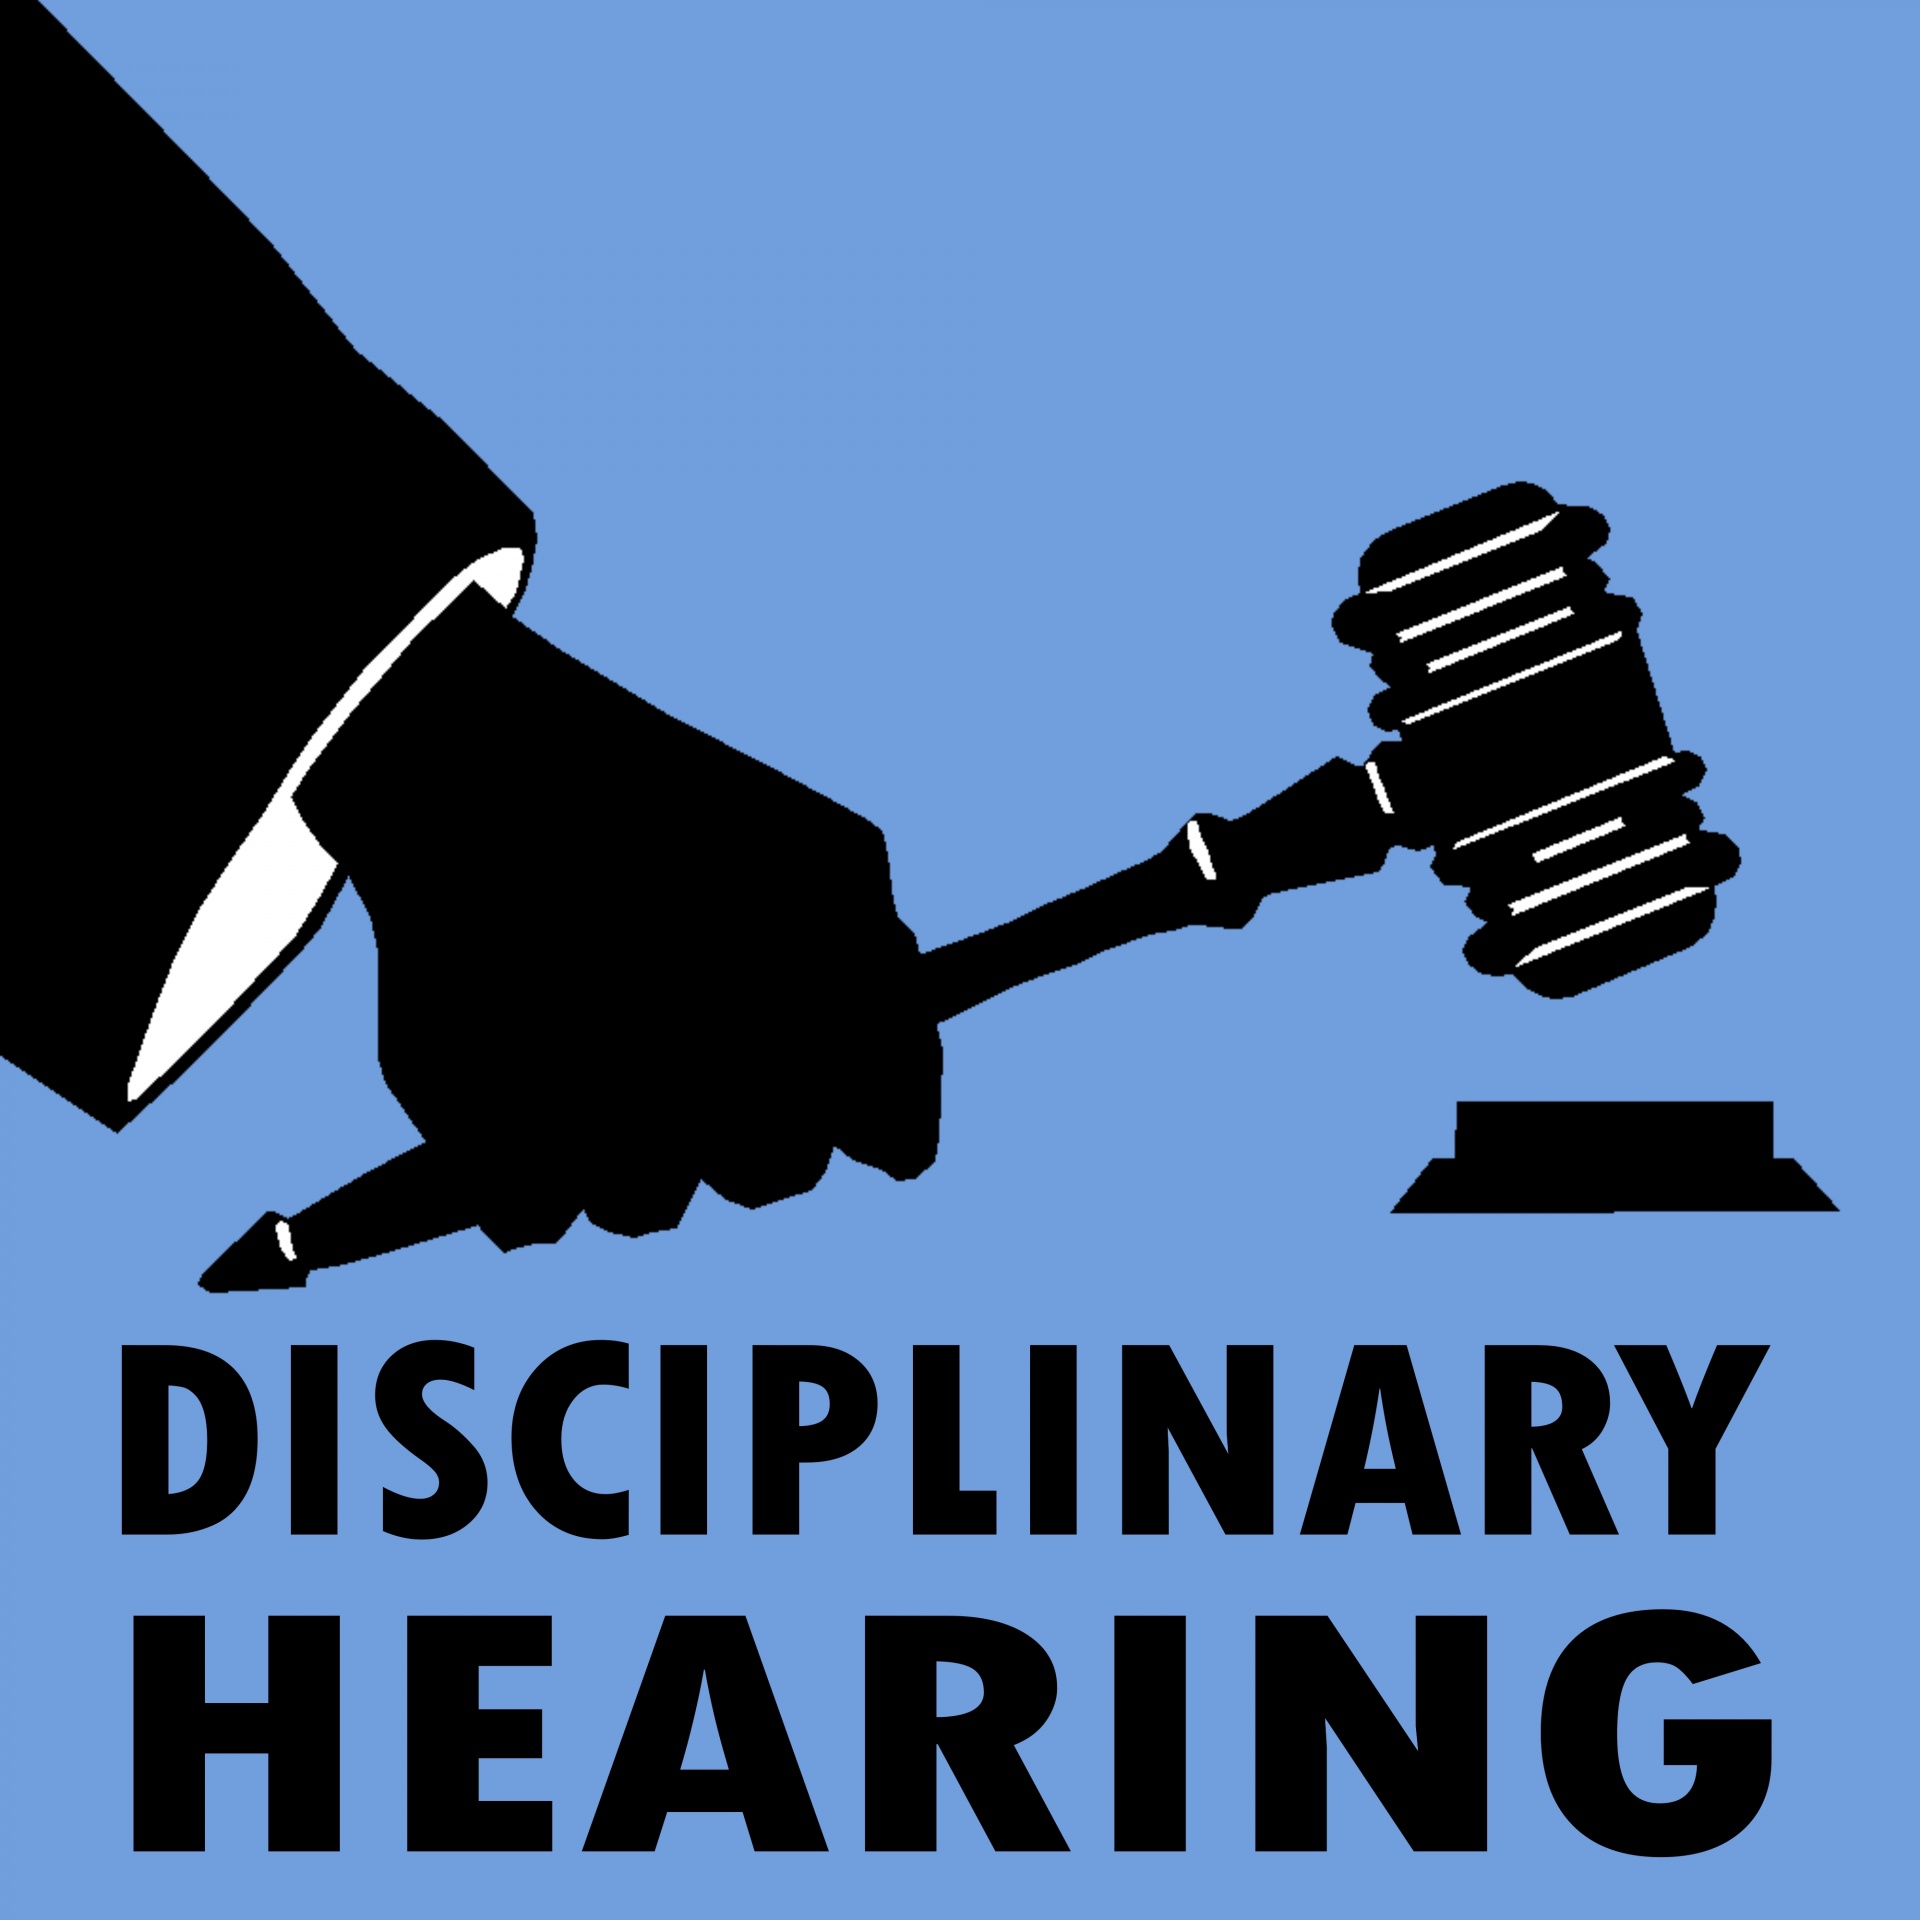 Business Disciplinary Hearing Sign